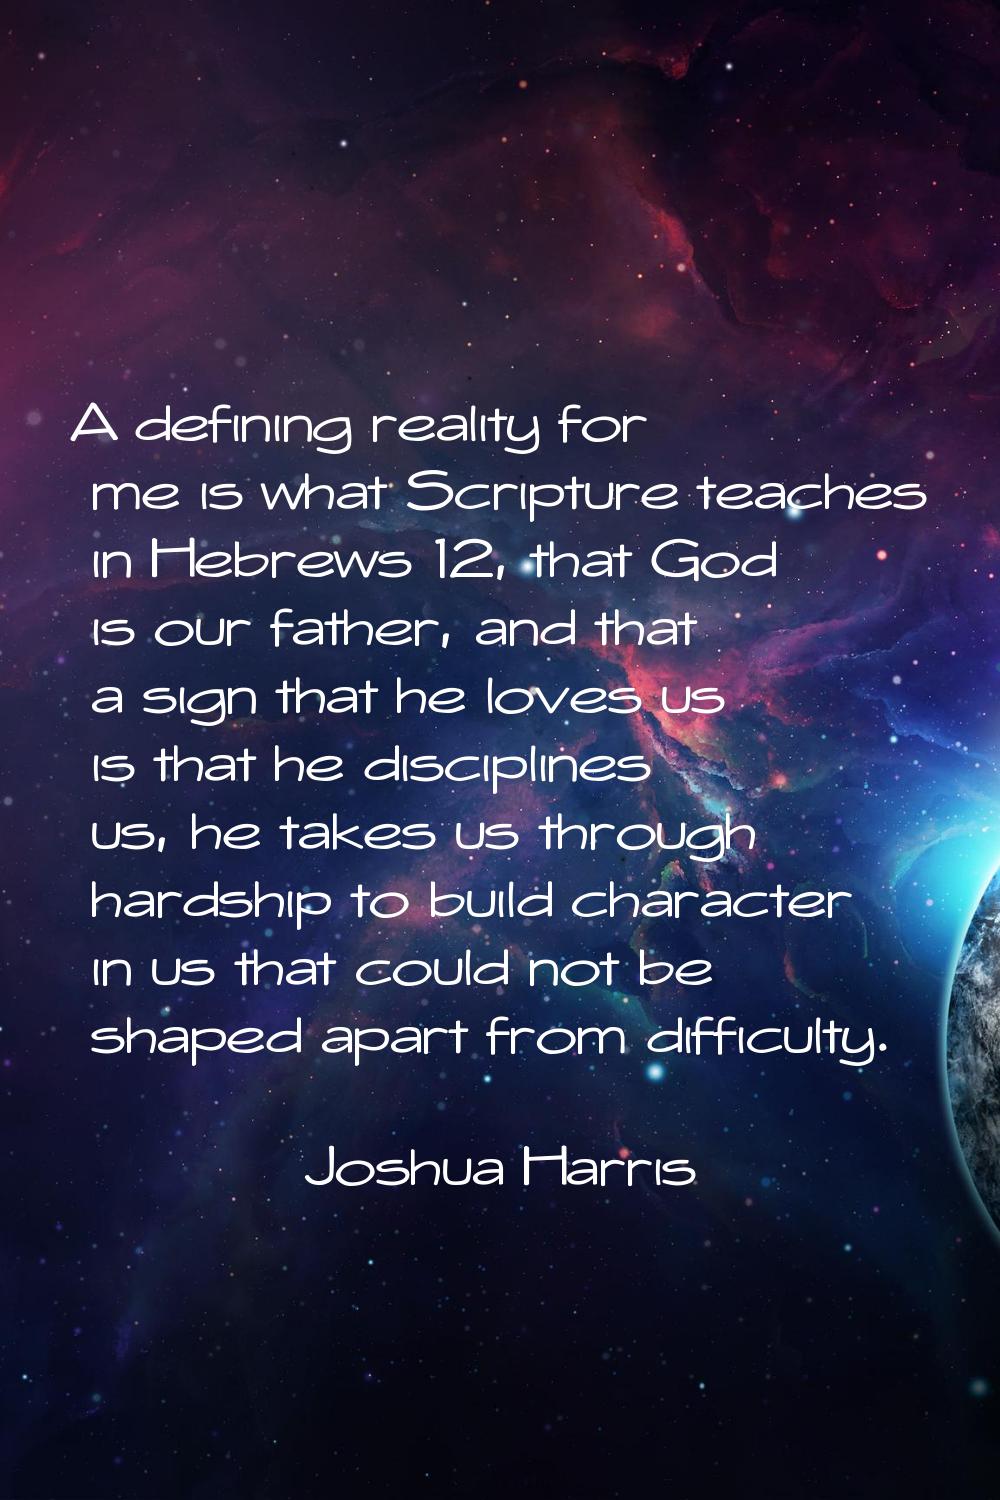 A defining reality for me is what Scripture teaches in Hebrews 12, that God is our father, and that